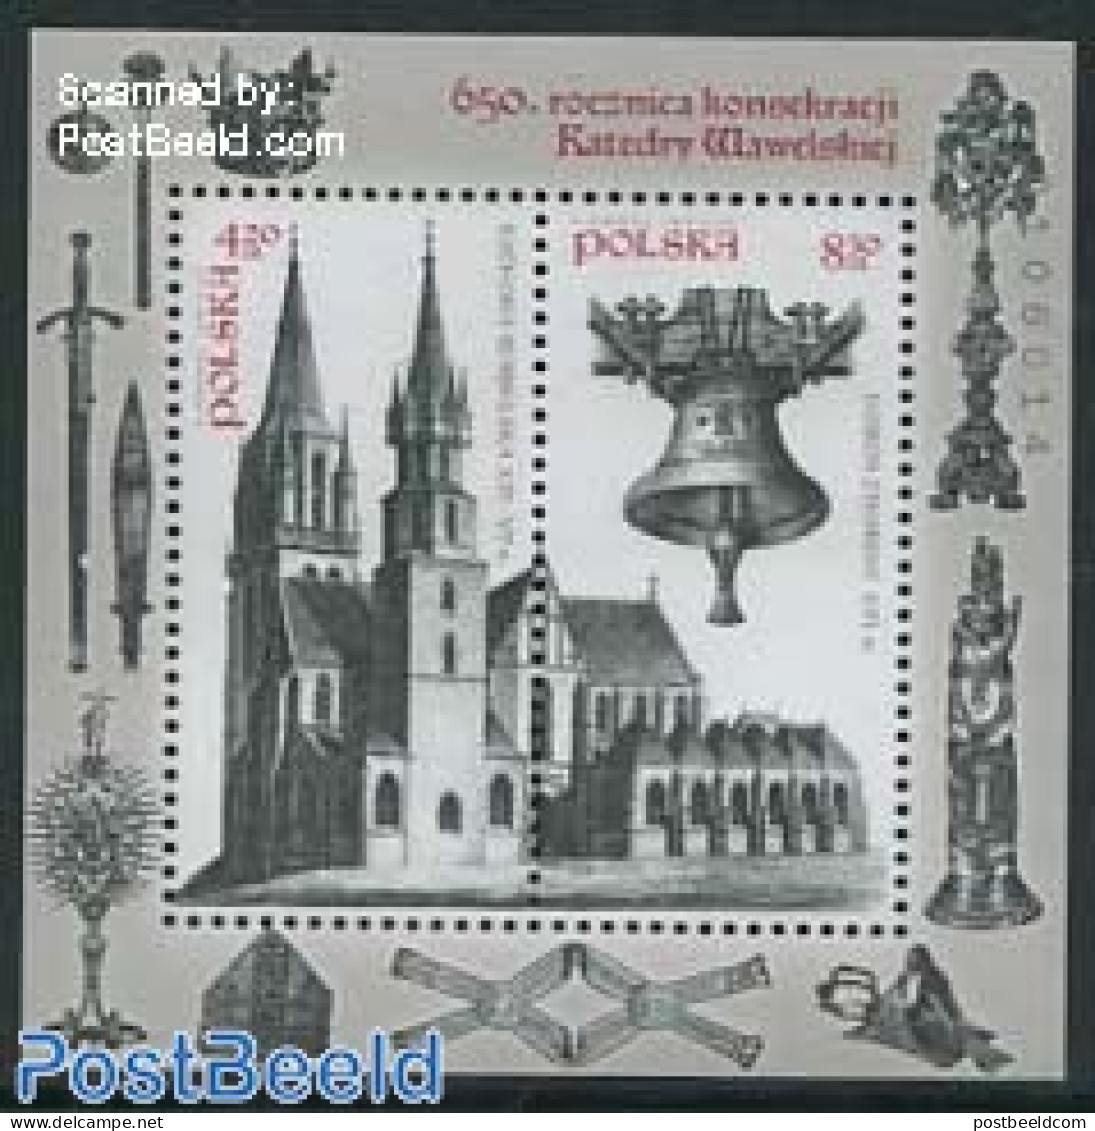 Poland 2014 Wawel Cathedral S/s, Mint NH, Religion - Churches, Temples, Mosques, Synagogues - Unused Stamps